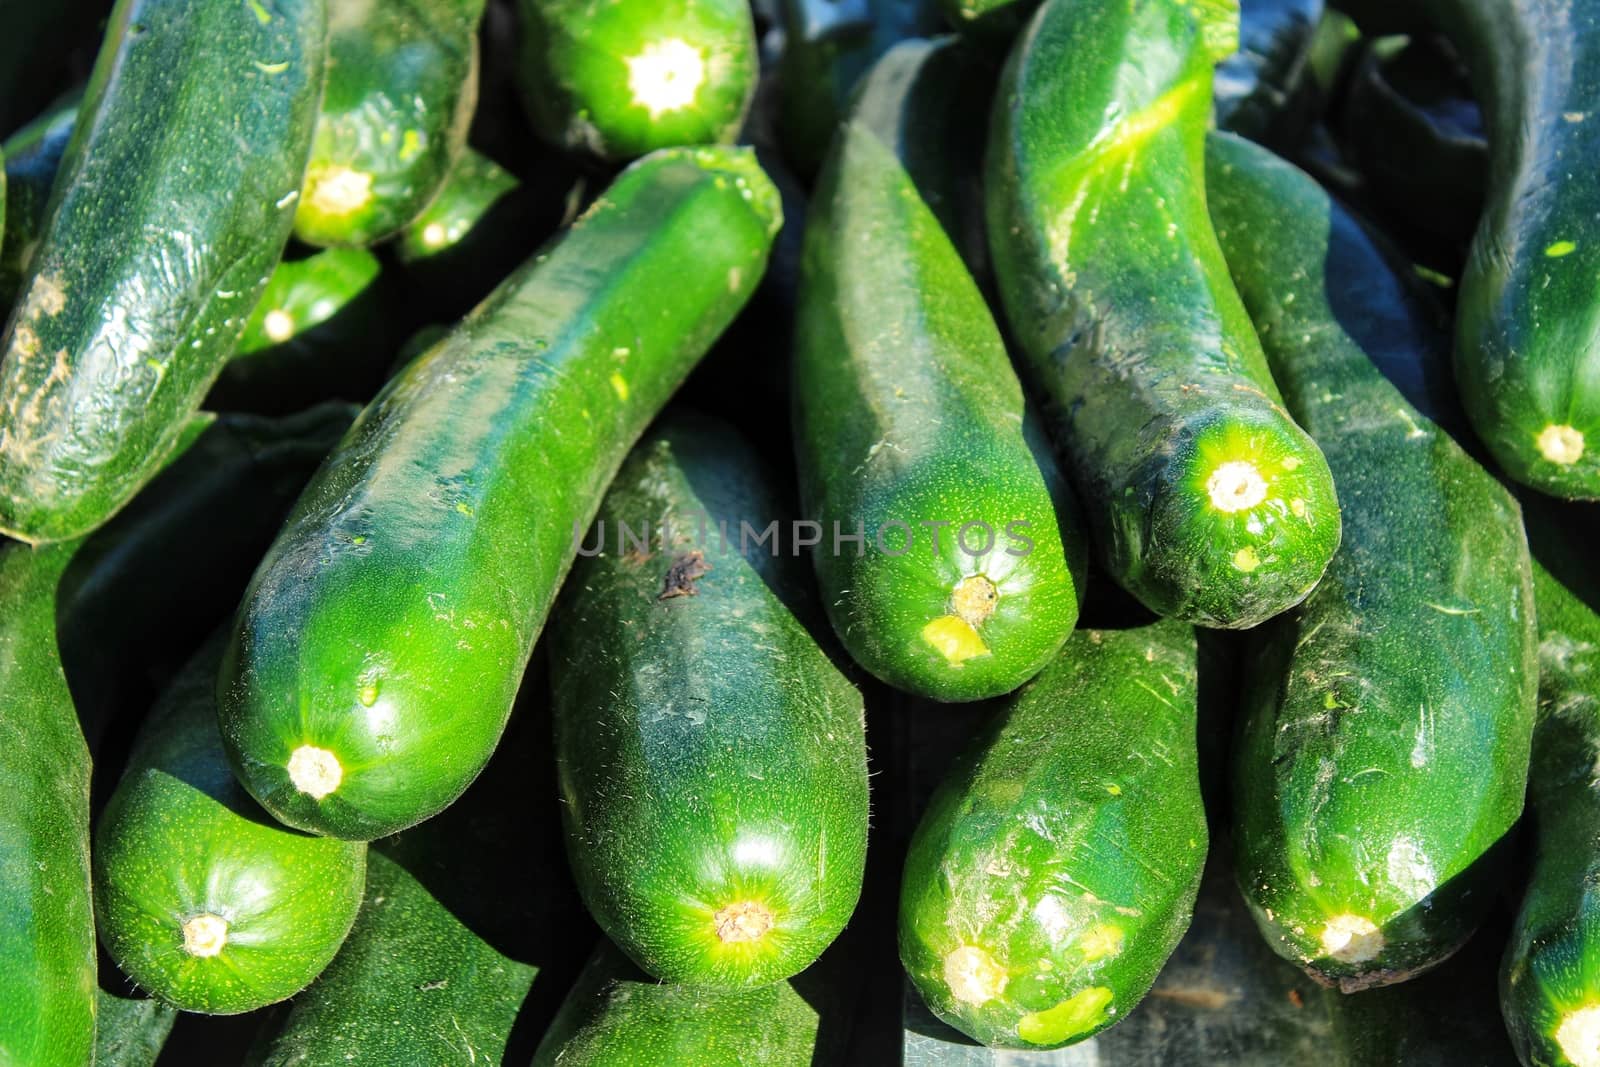 Zucchini for sale at a market stall by soniabonet